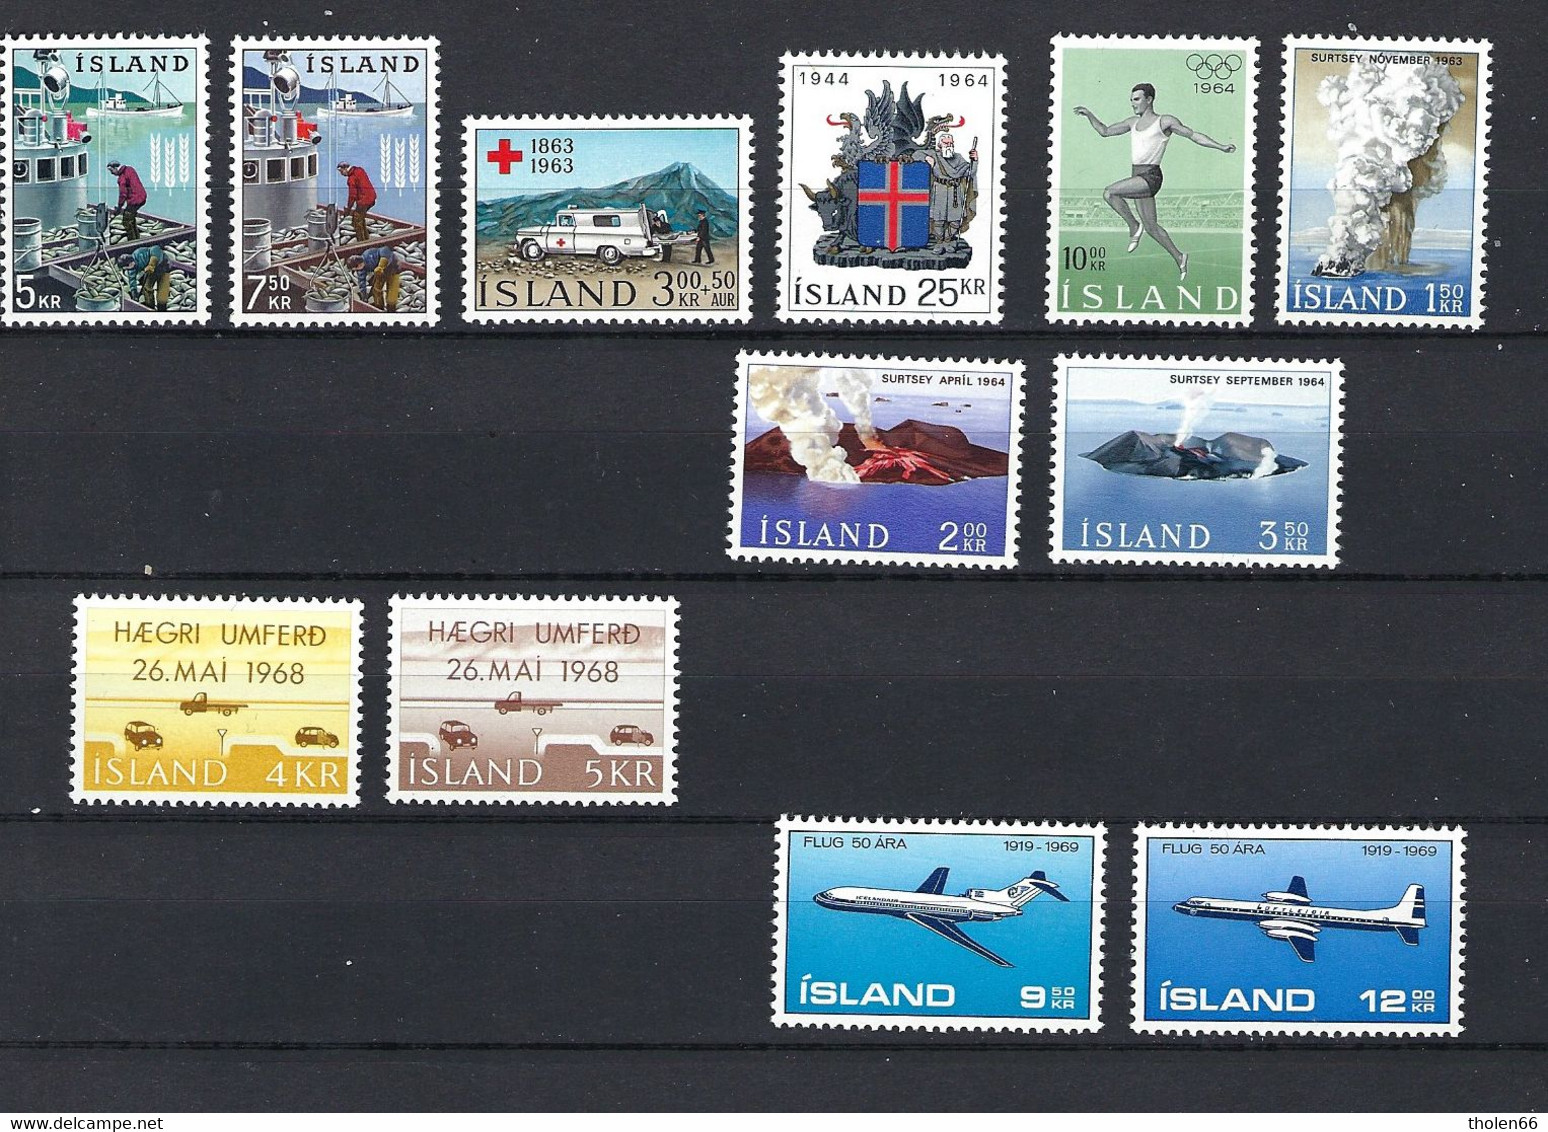 Islande - Iceland Loft Of Never Hinged Stamps ** (lot 452) - Collections, Lots & Series